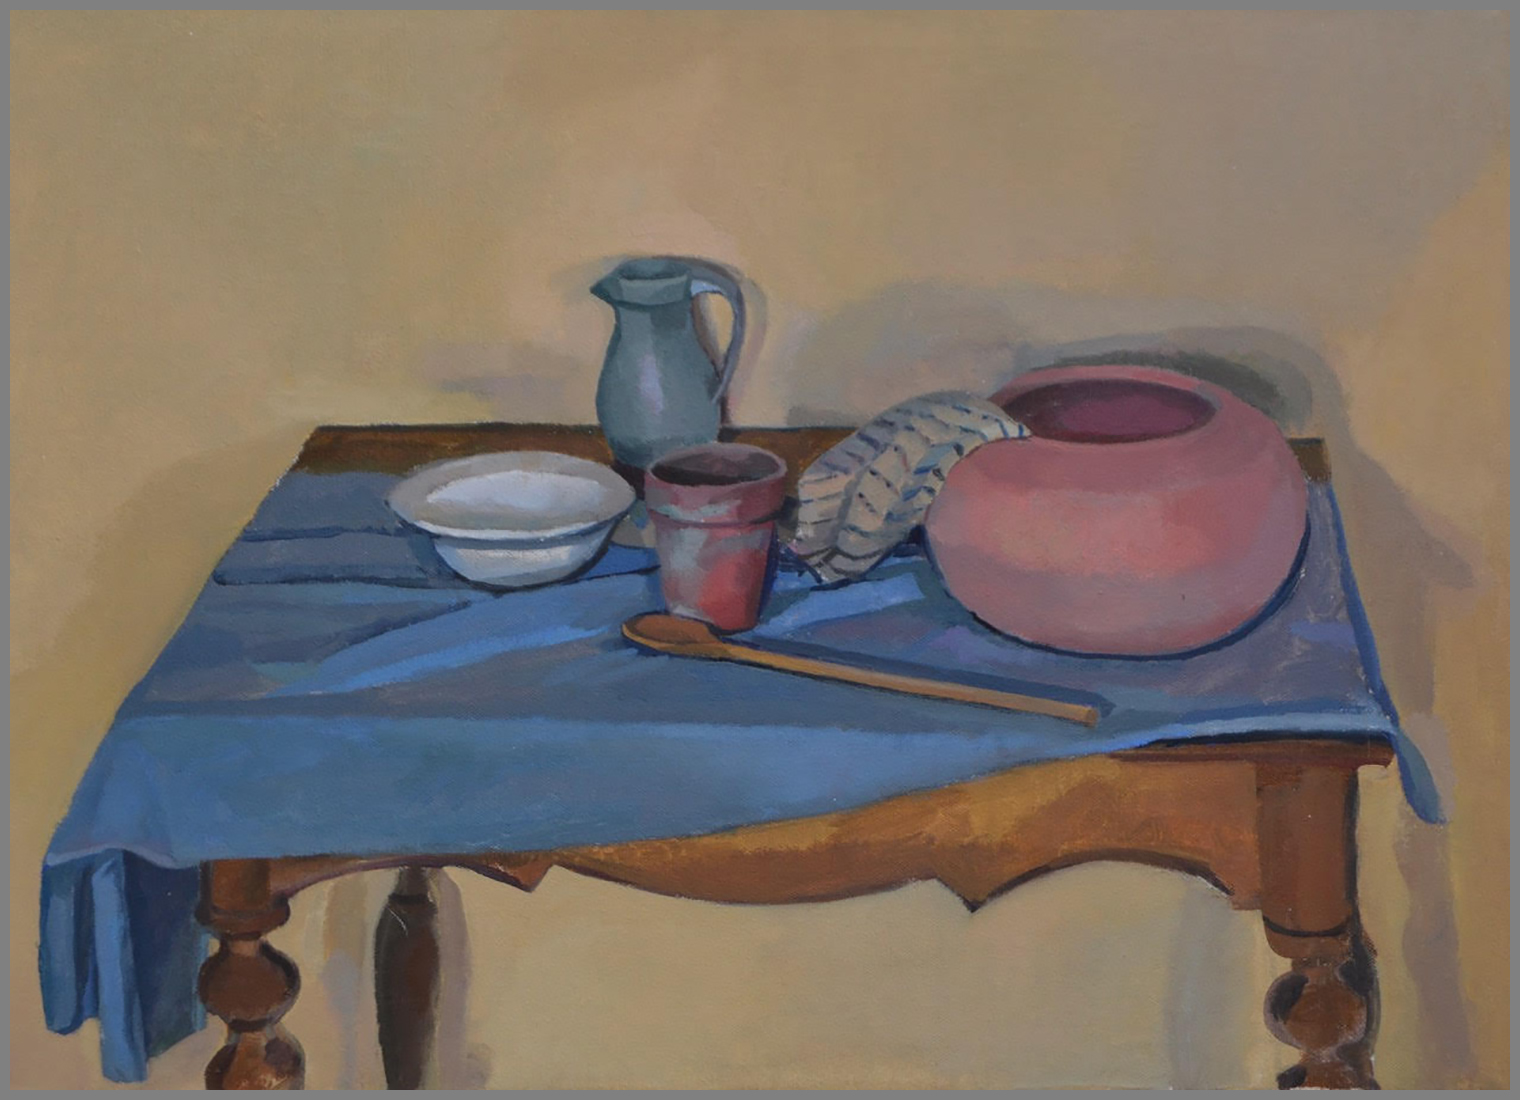  Still Life with White Bowl, oil/canvas, 17 x 23 inches 